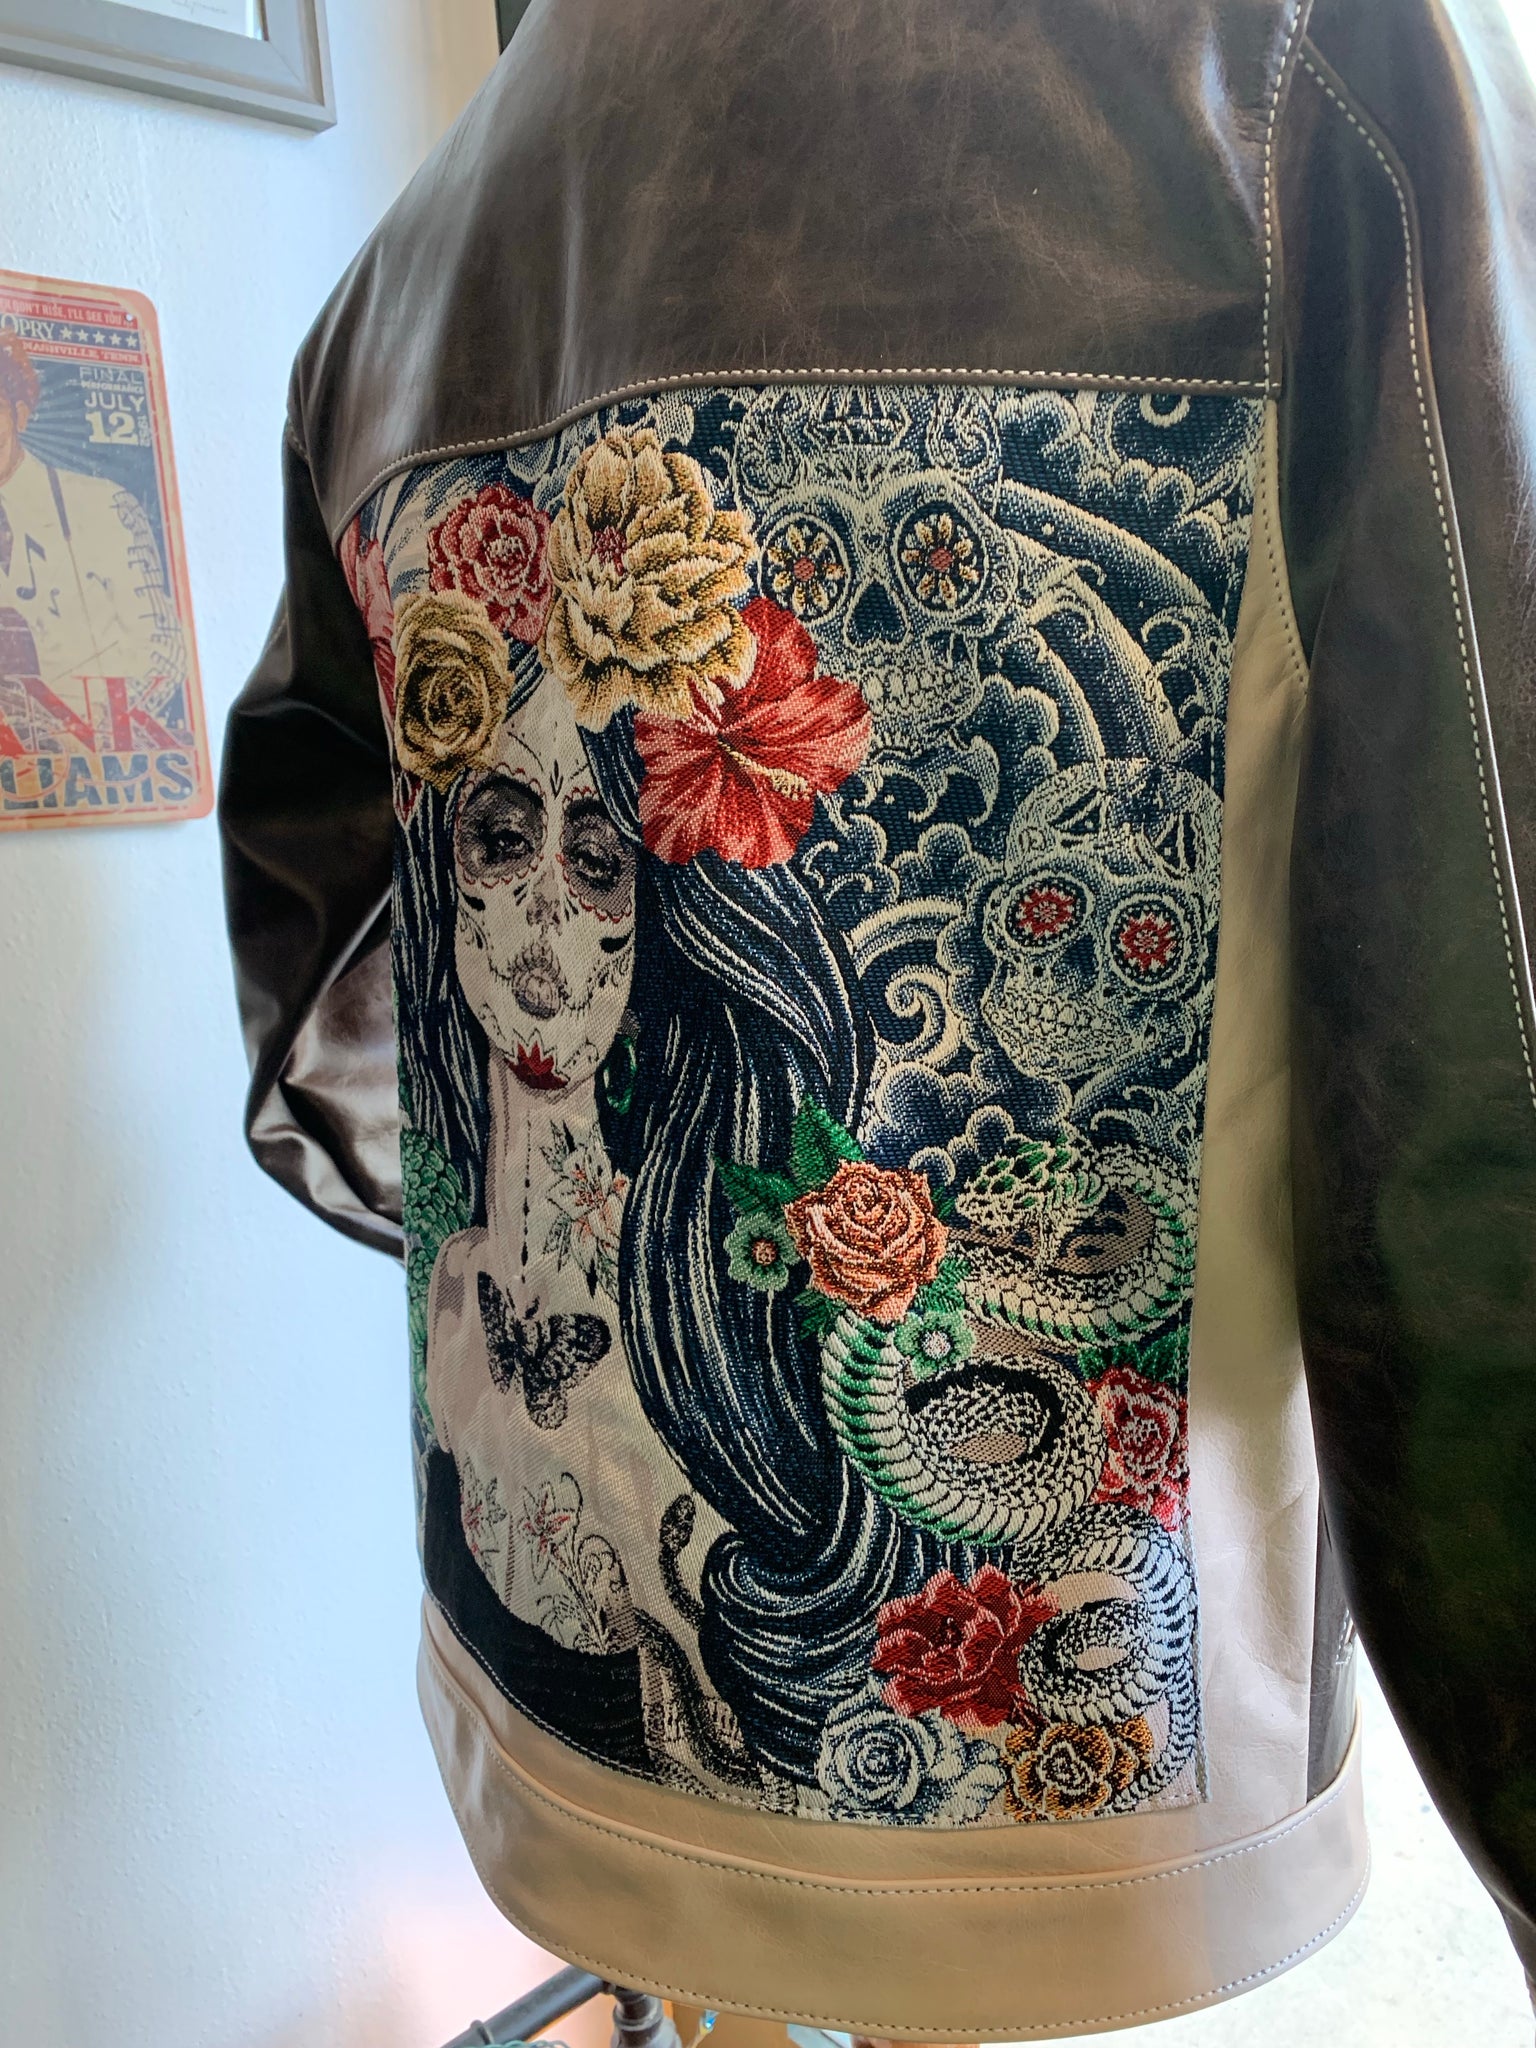 The snake charmer leather jacket